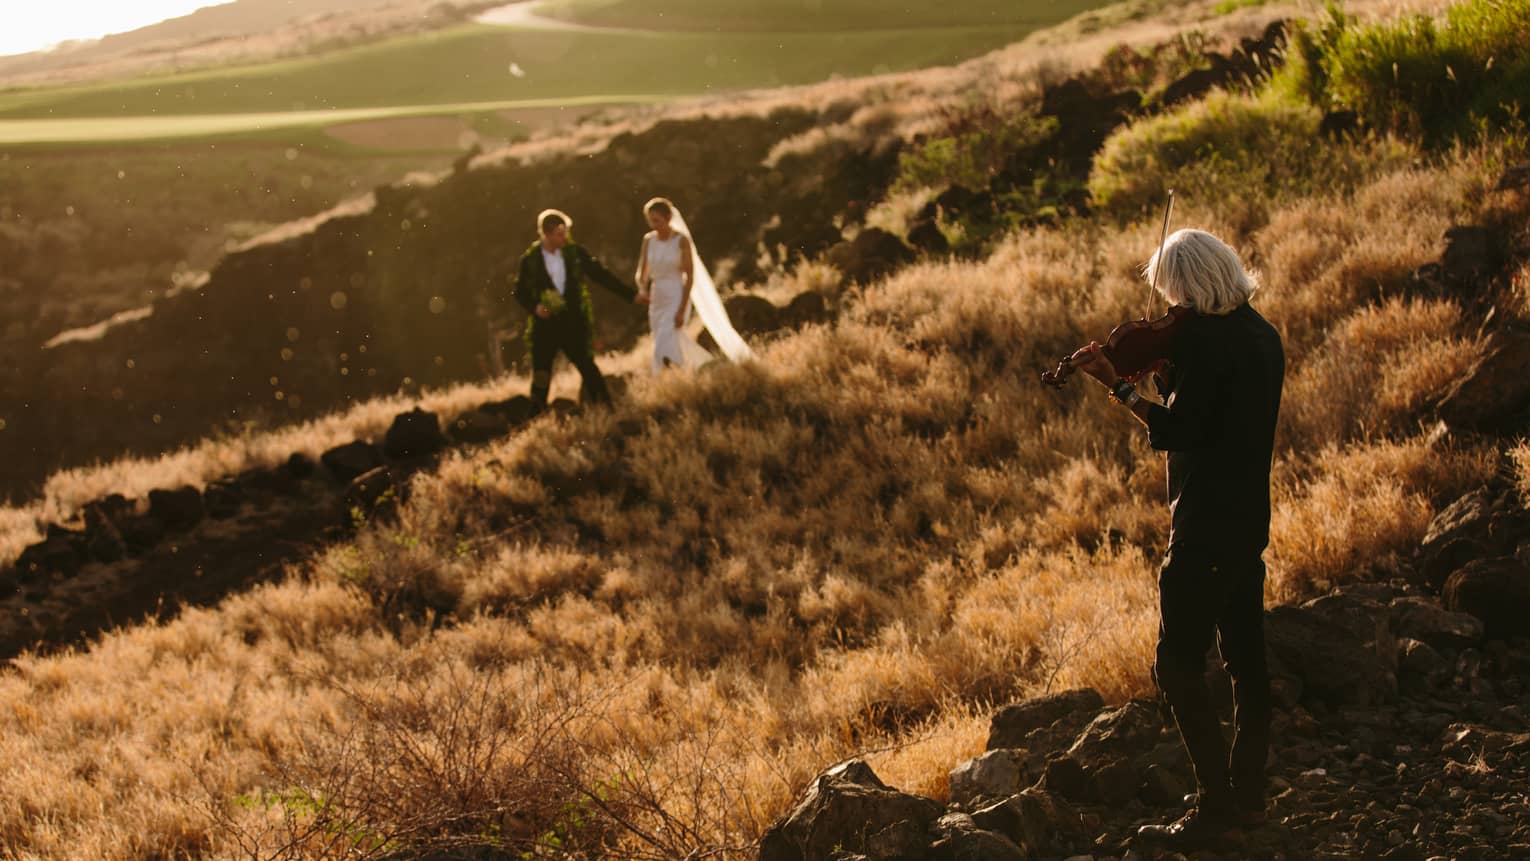 A couple in a wedding dress and suit walk through red oat grass on the side of a hillside, as a photographer clad in black records them.